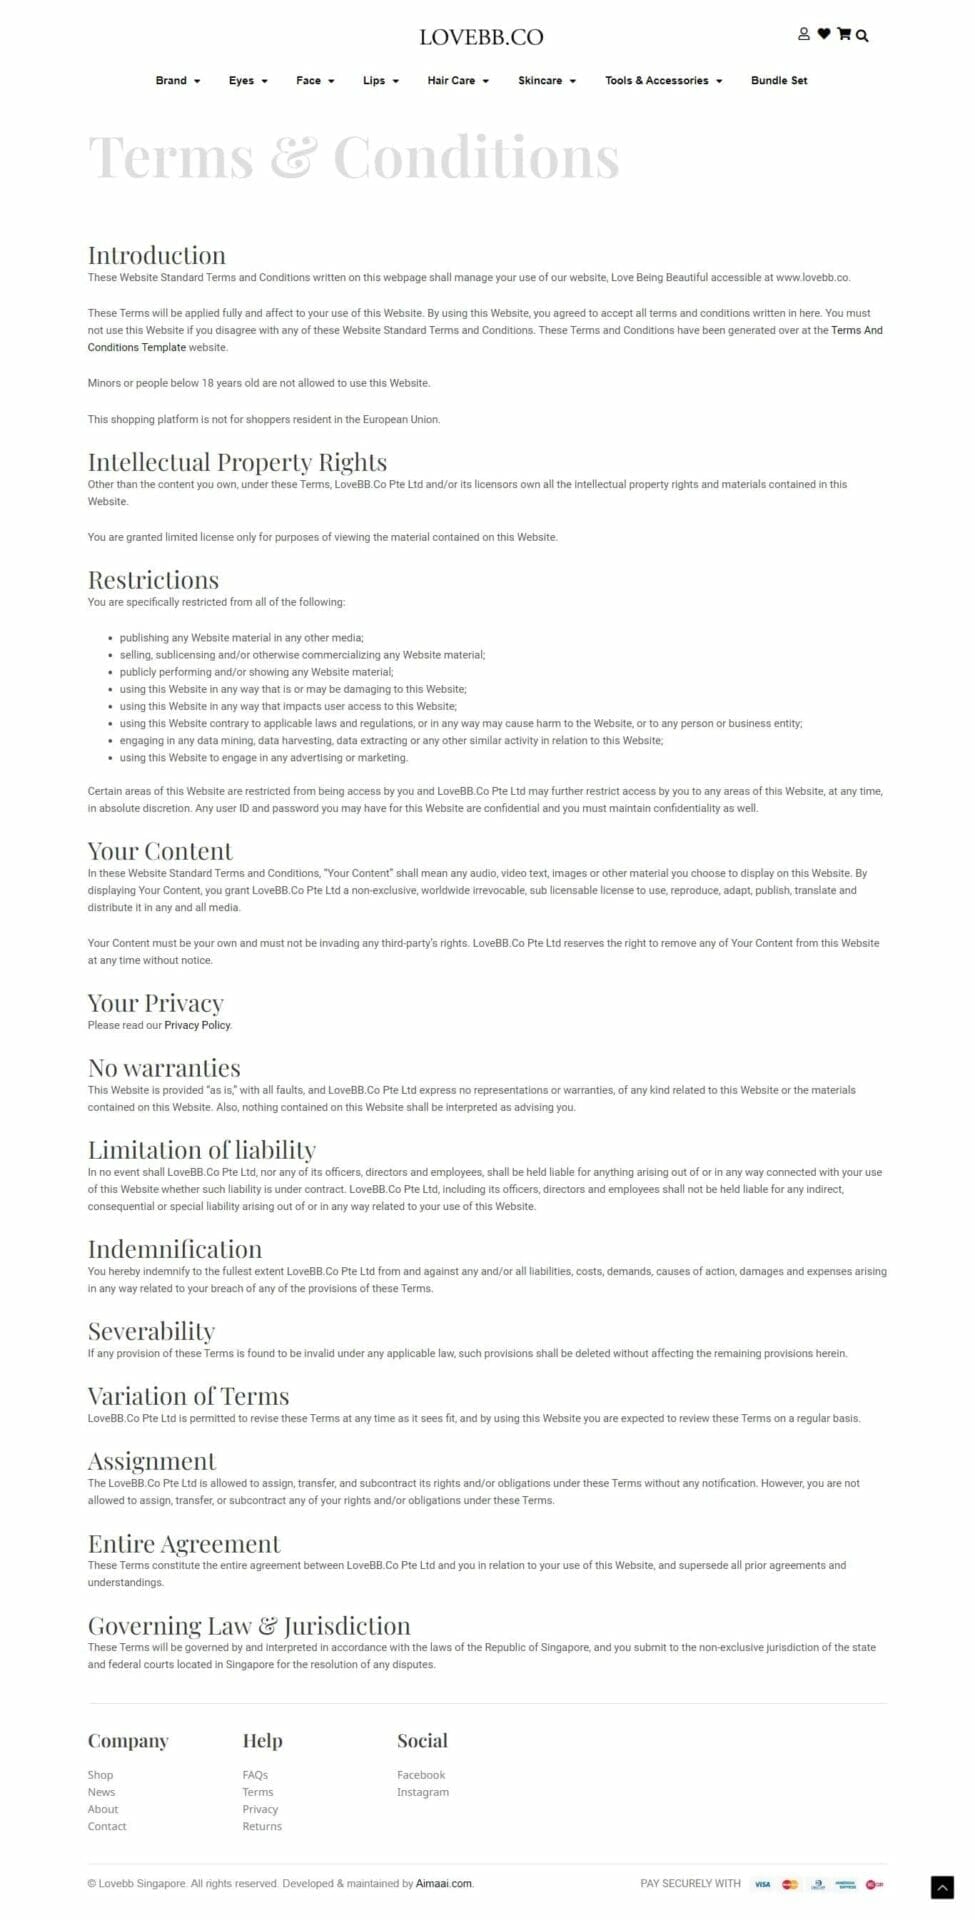 The terms and conditions page of a website pertaining to web development.